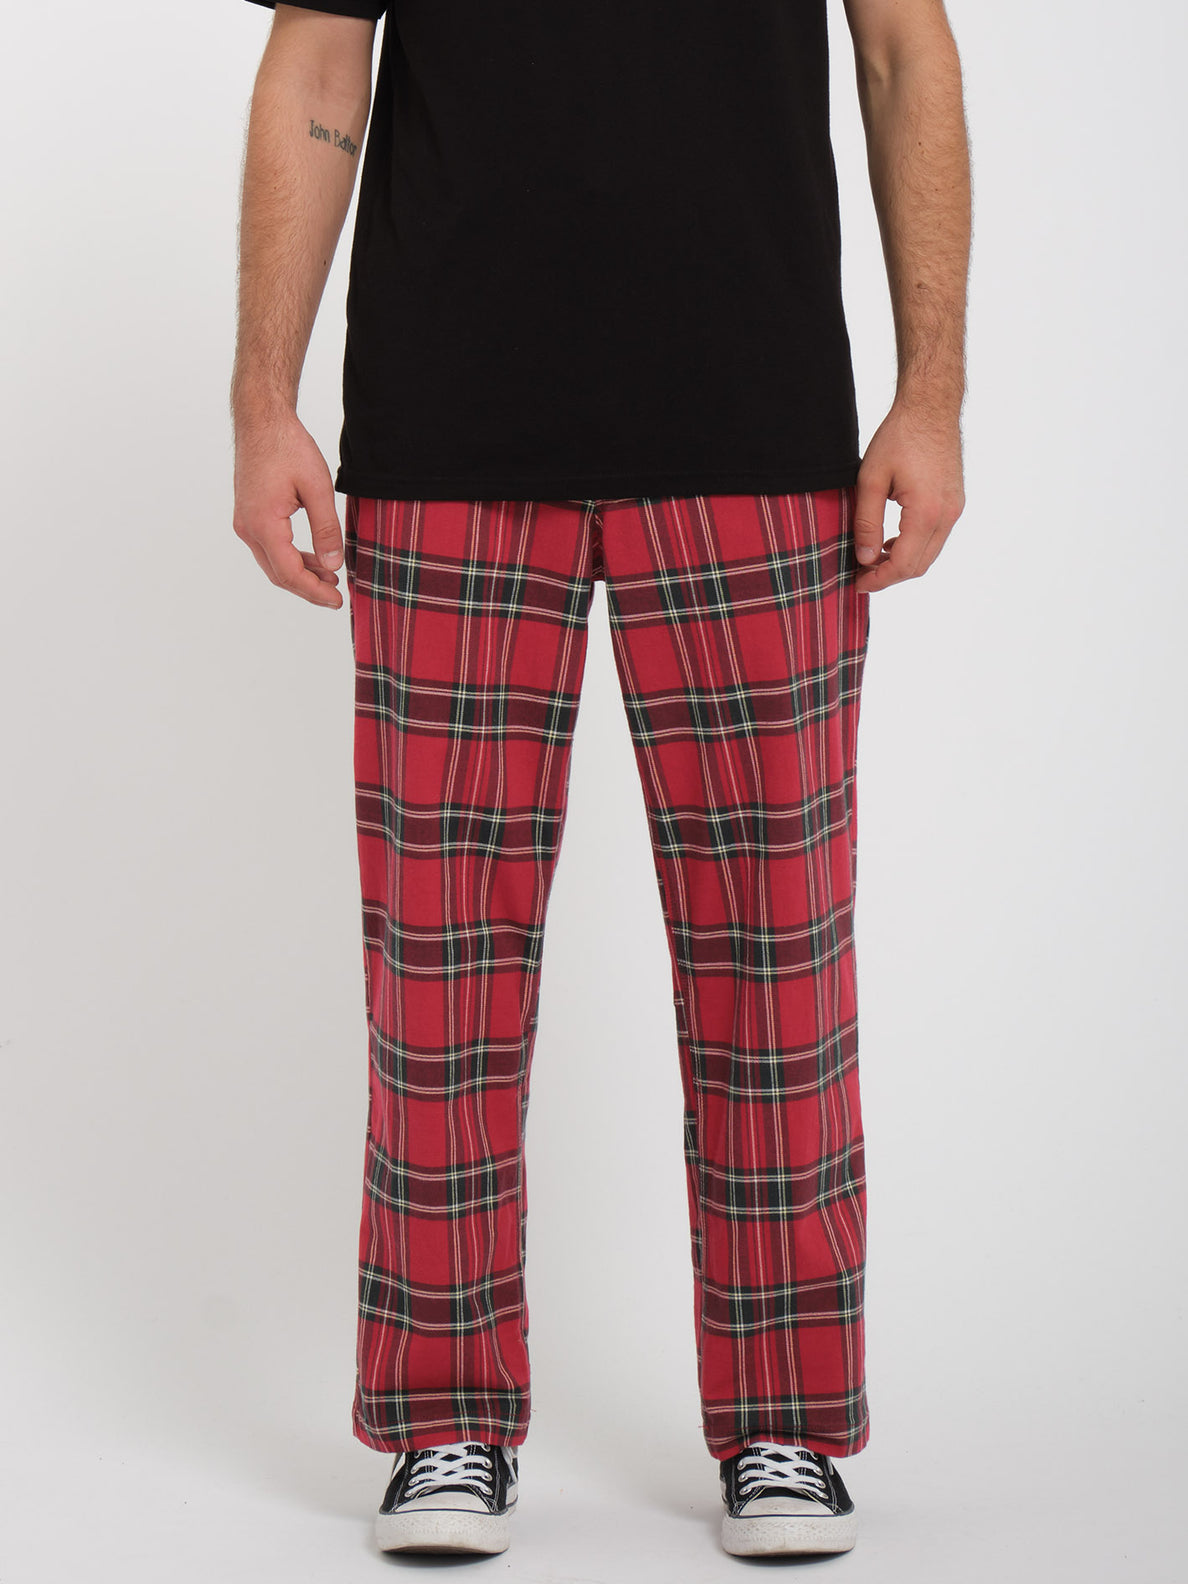 Red Tartan Checked Trousers Slim Plaid Pants (Made in the UK)